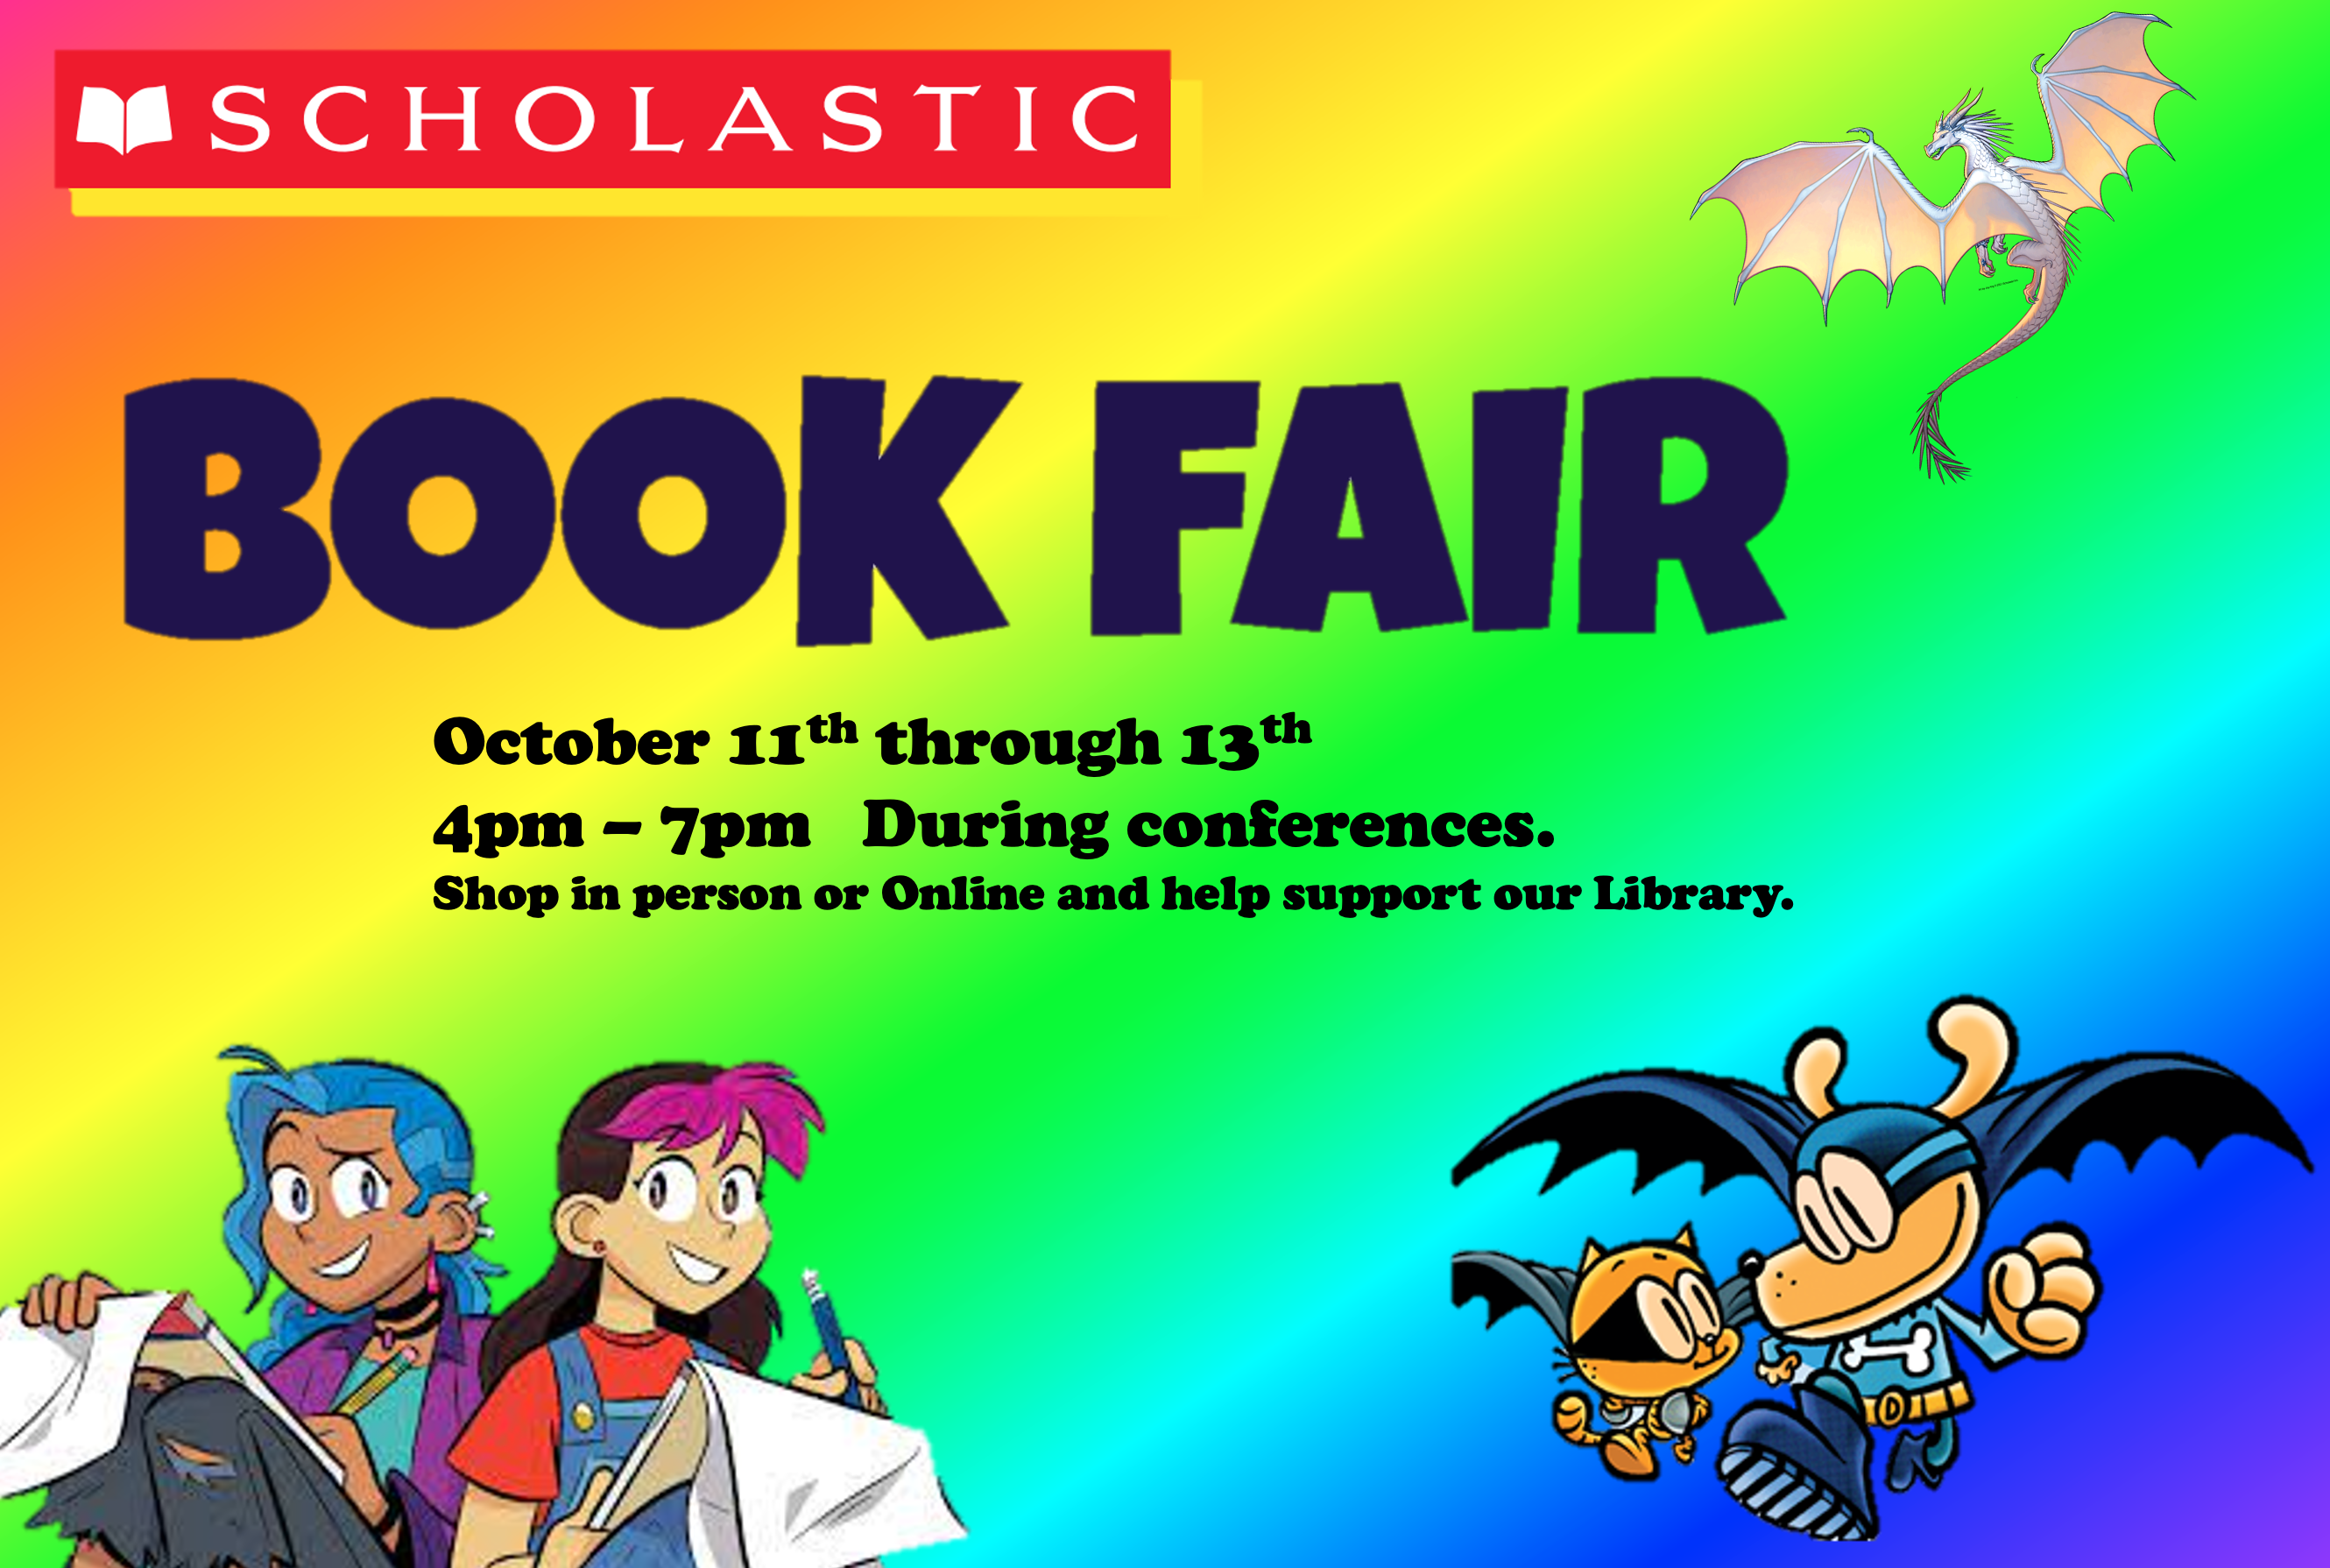 Image with Dog Man and Best Friends listing Book Fair dates 10/11-10/13.